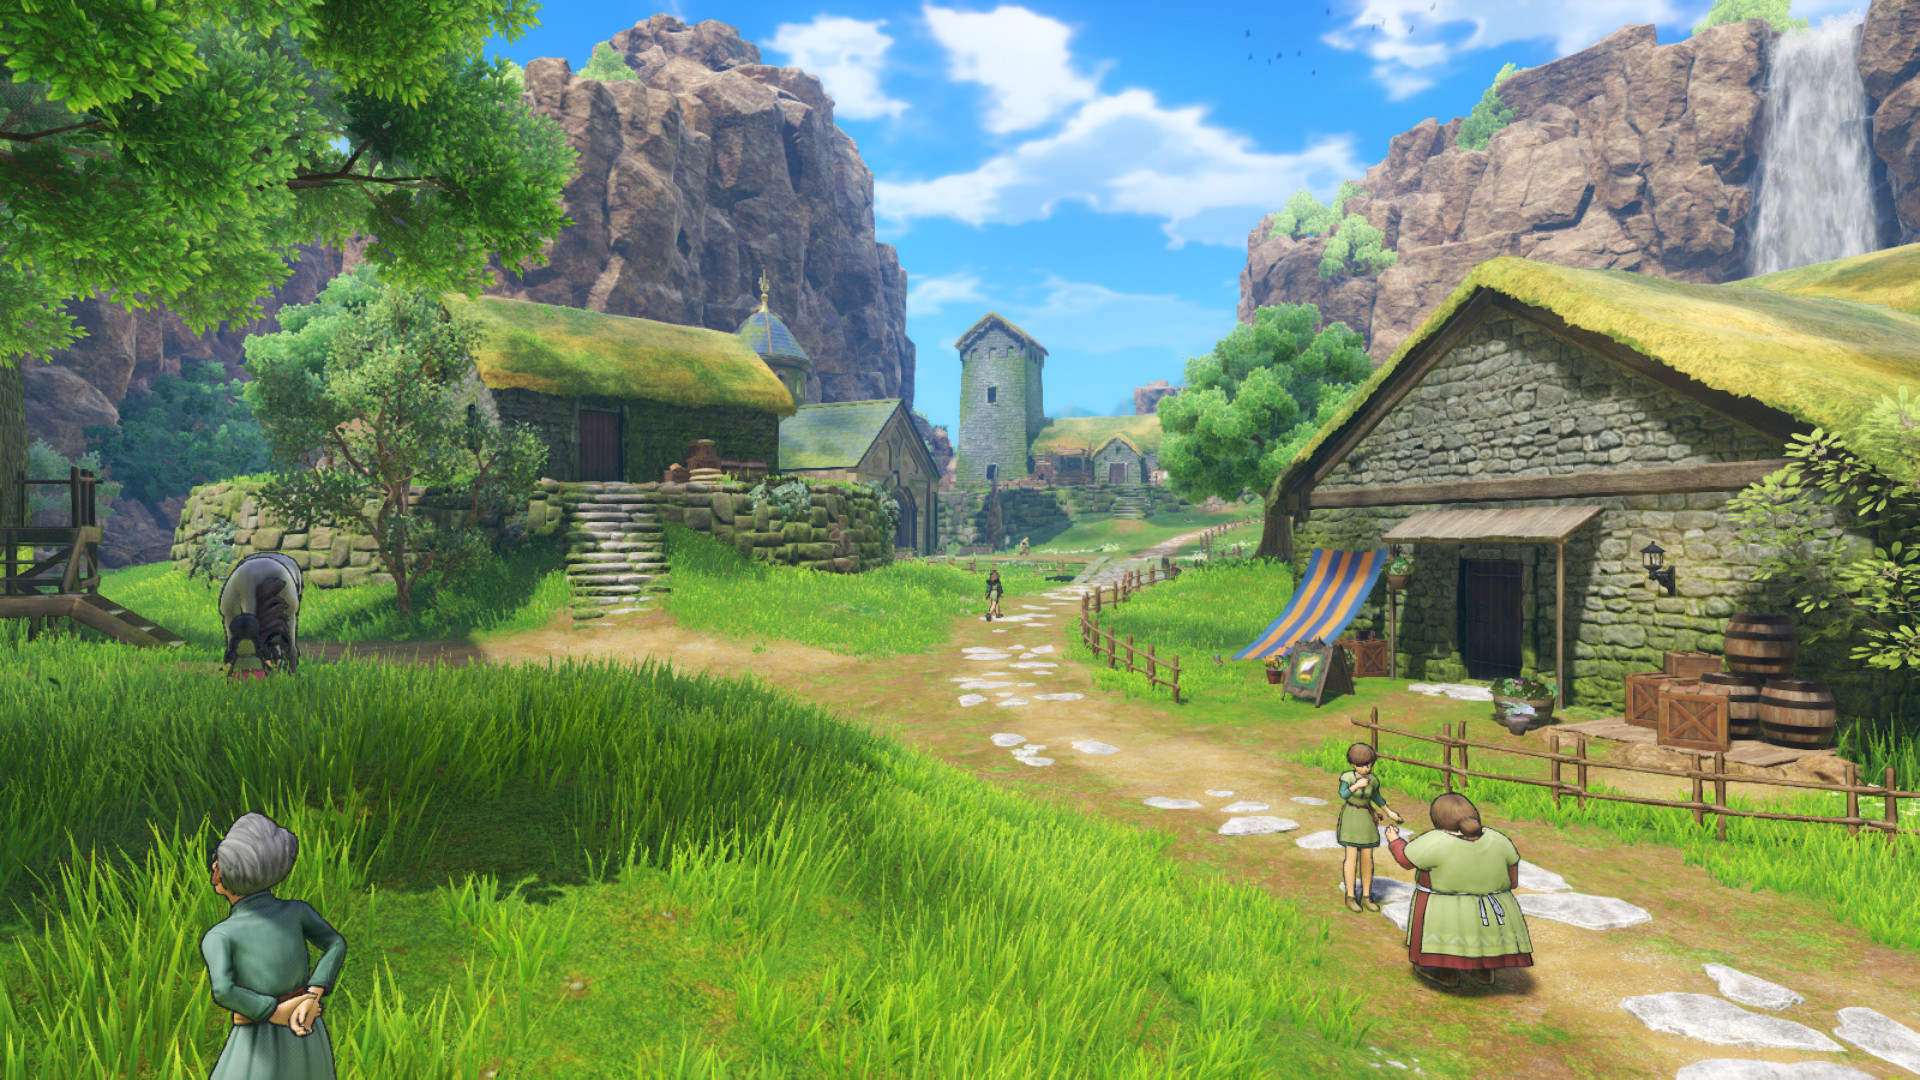 DRAGON QUEST XI: Echoes of an Elusive Age - Digital Edition of Light screenshot